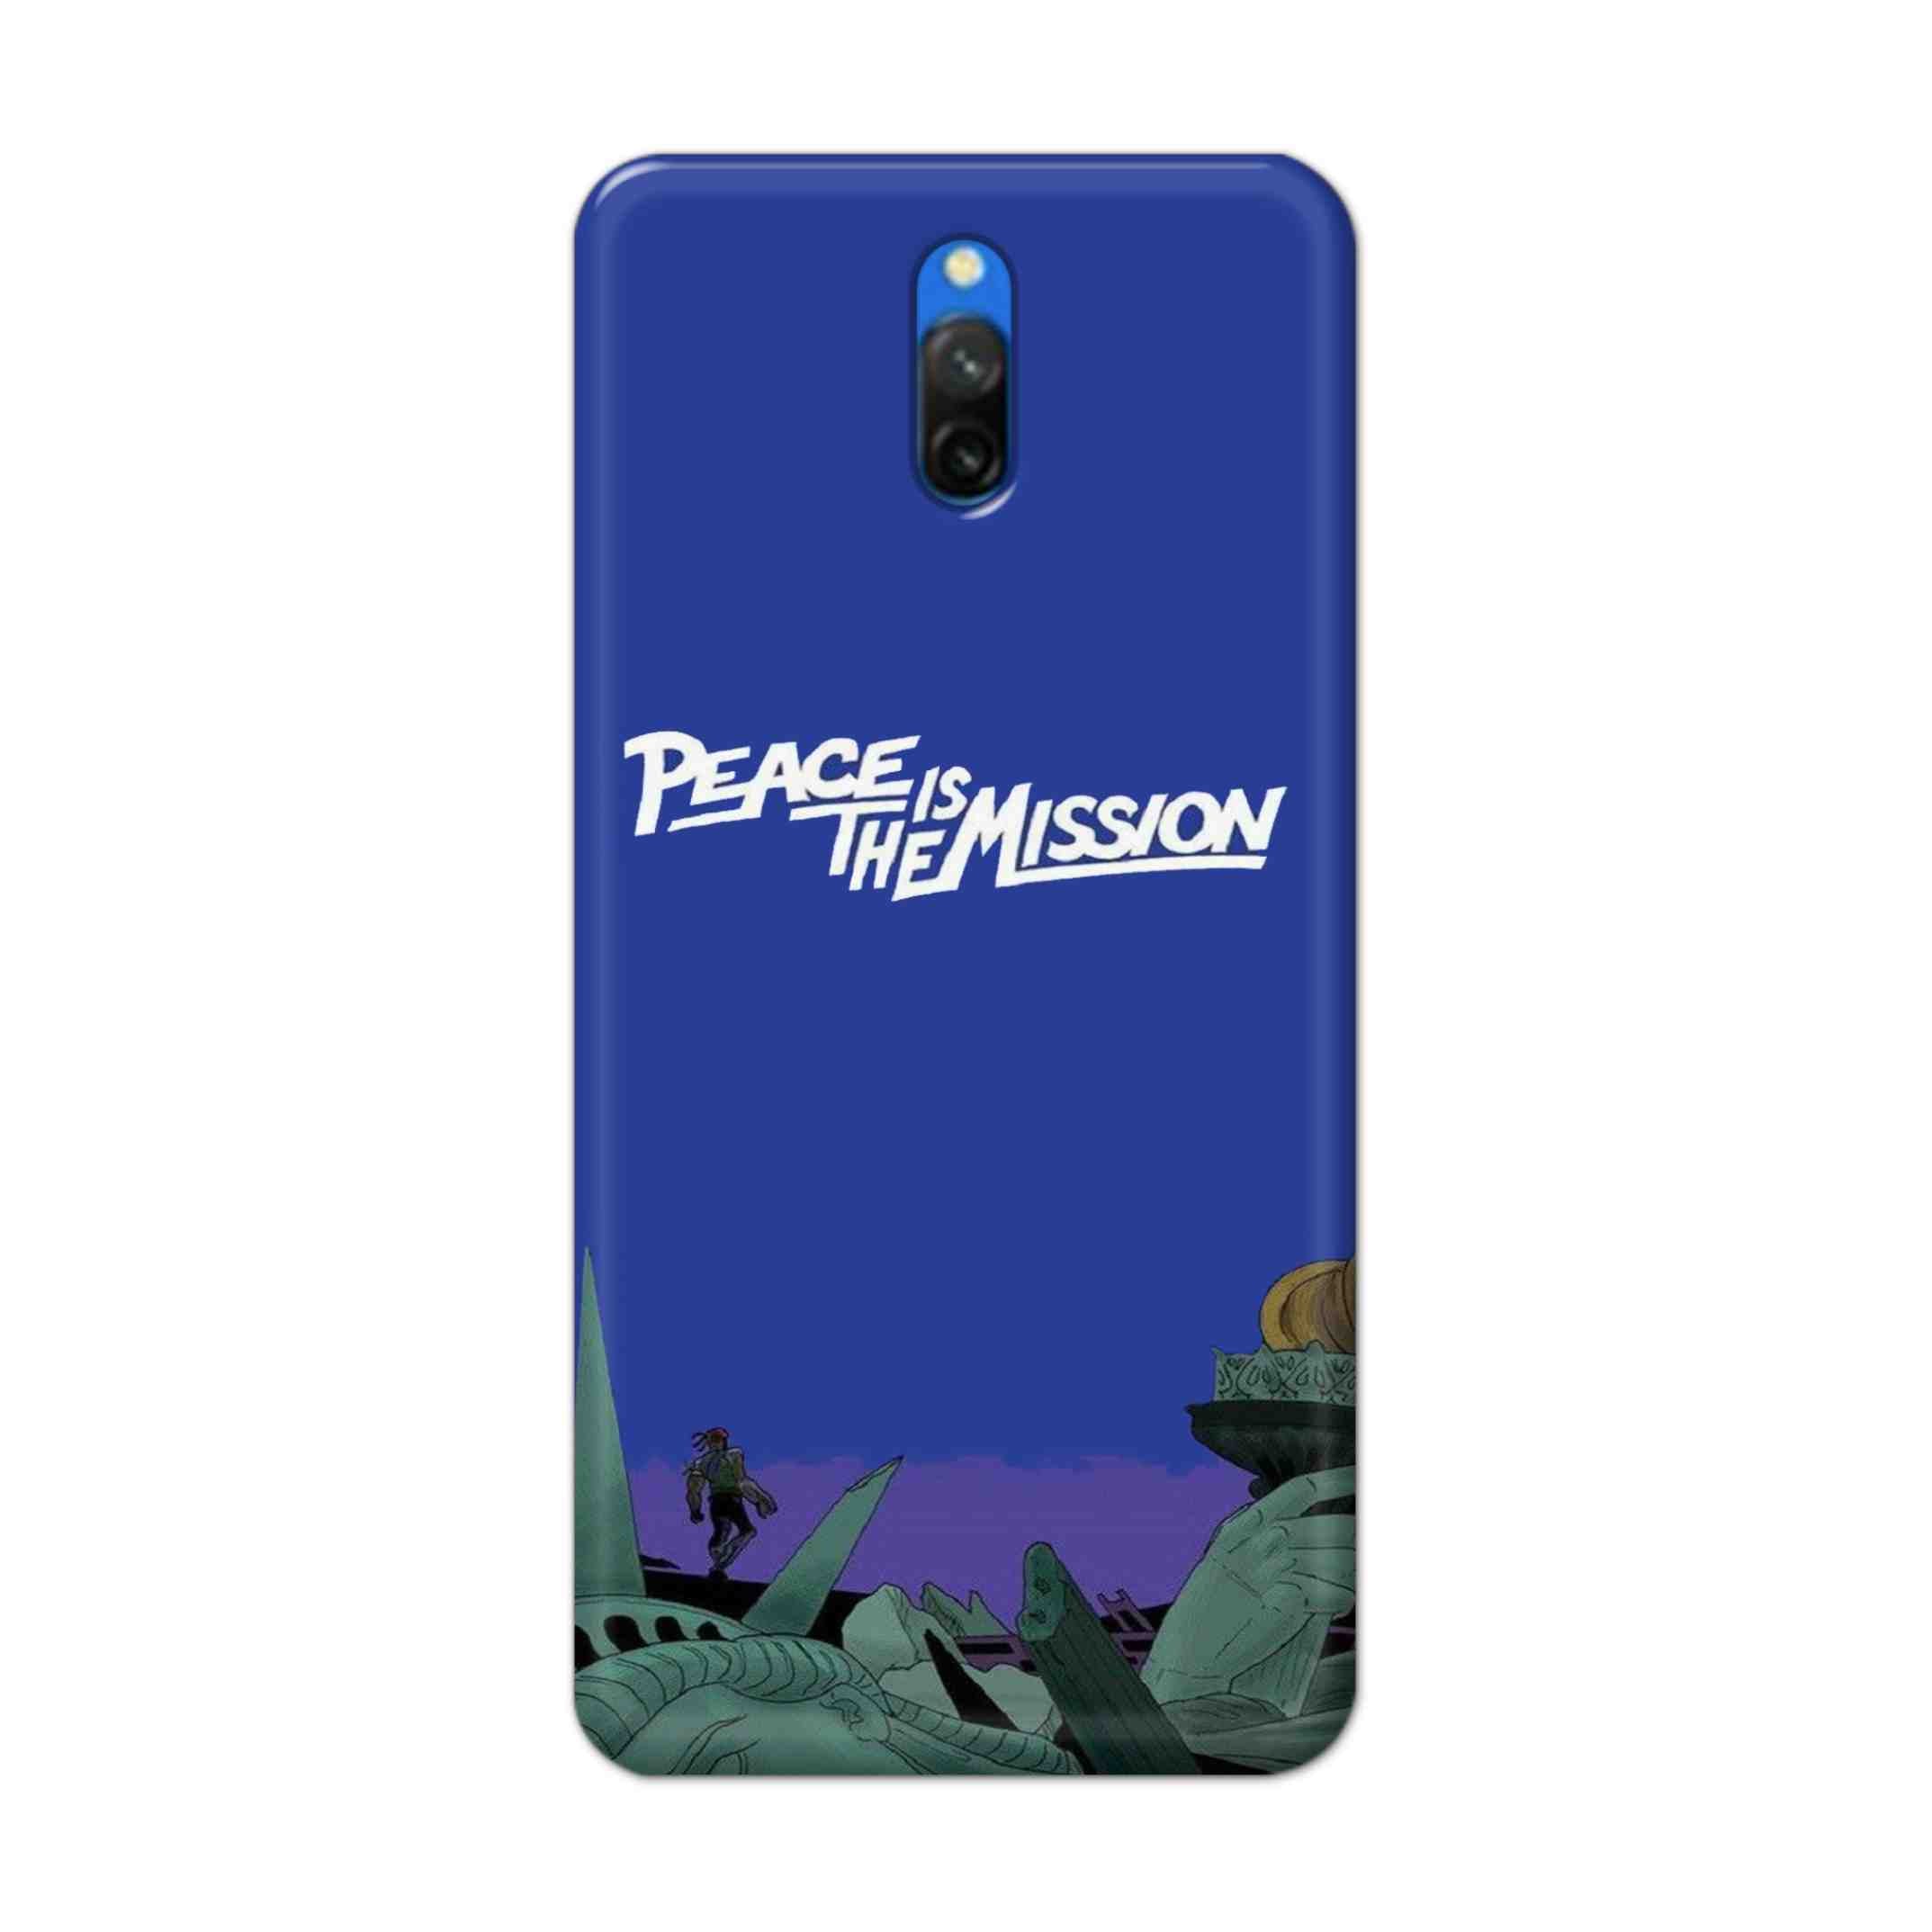 Buy Peace Is The Misson Hard Back Mobile Phone Case/Cover For Redmi 8A Dual Online